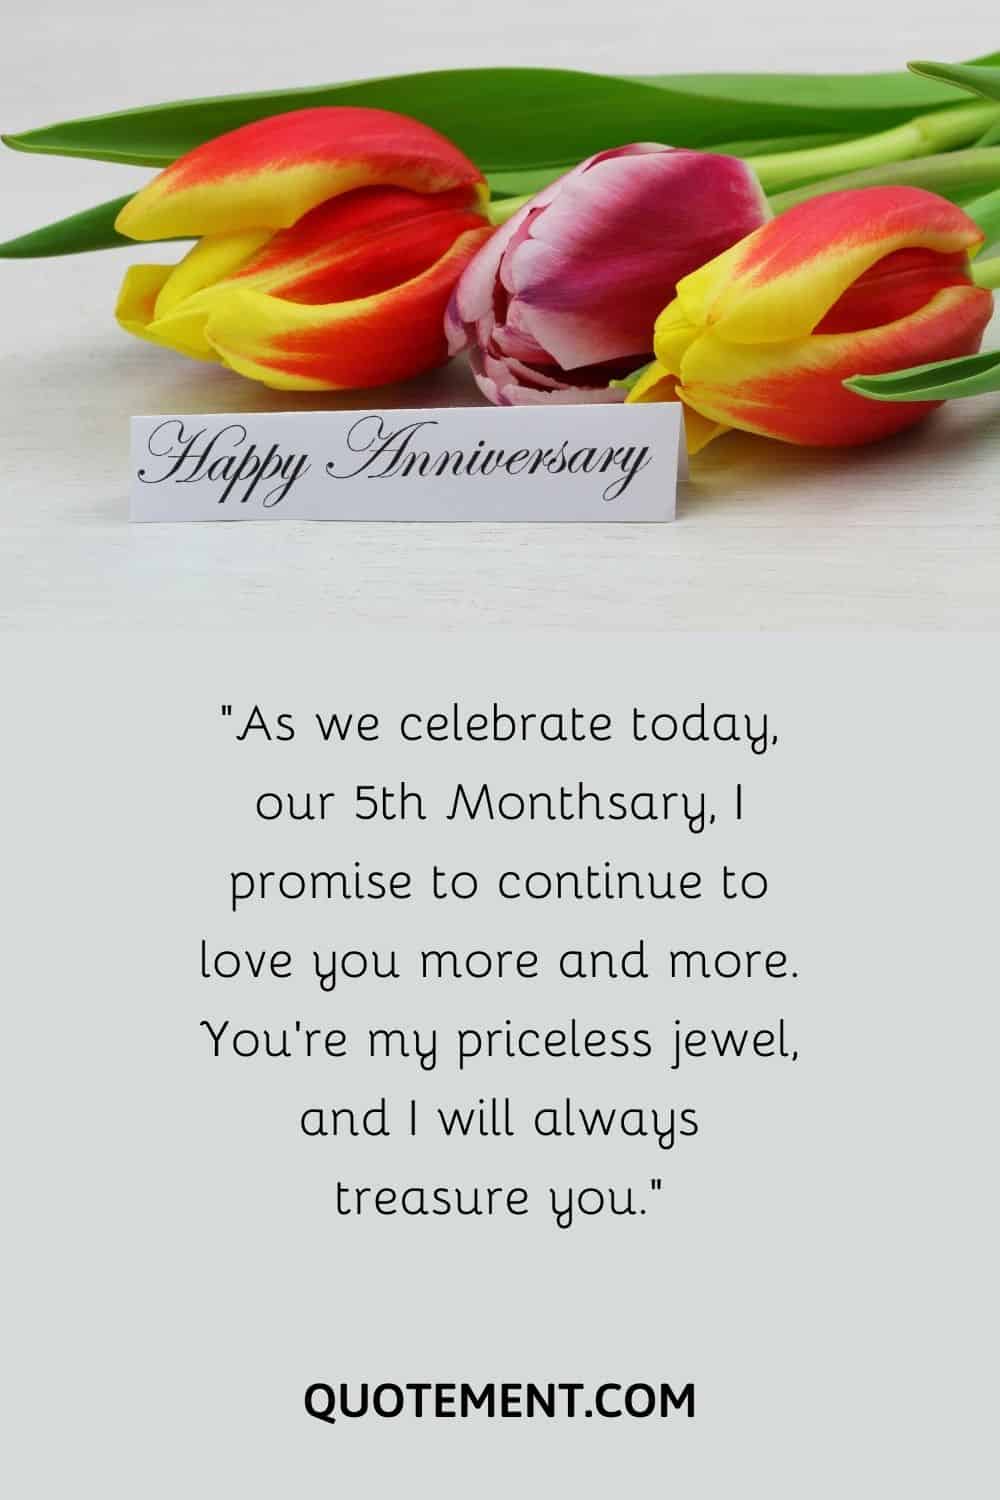 As we celebrate today, our 5th Monthsary, I promise to continue to love you more and more.